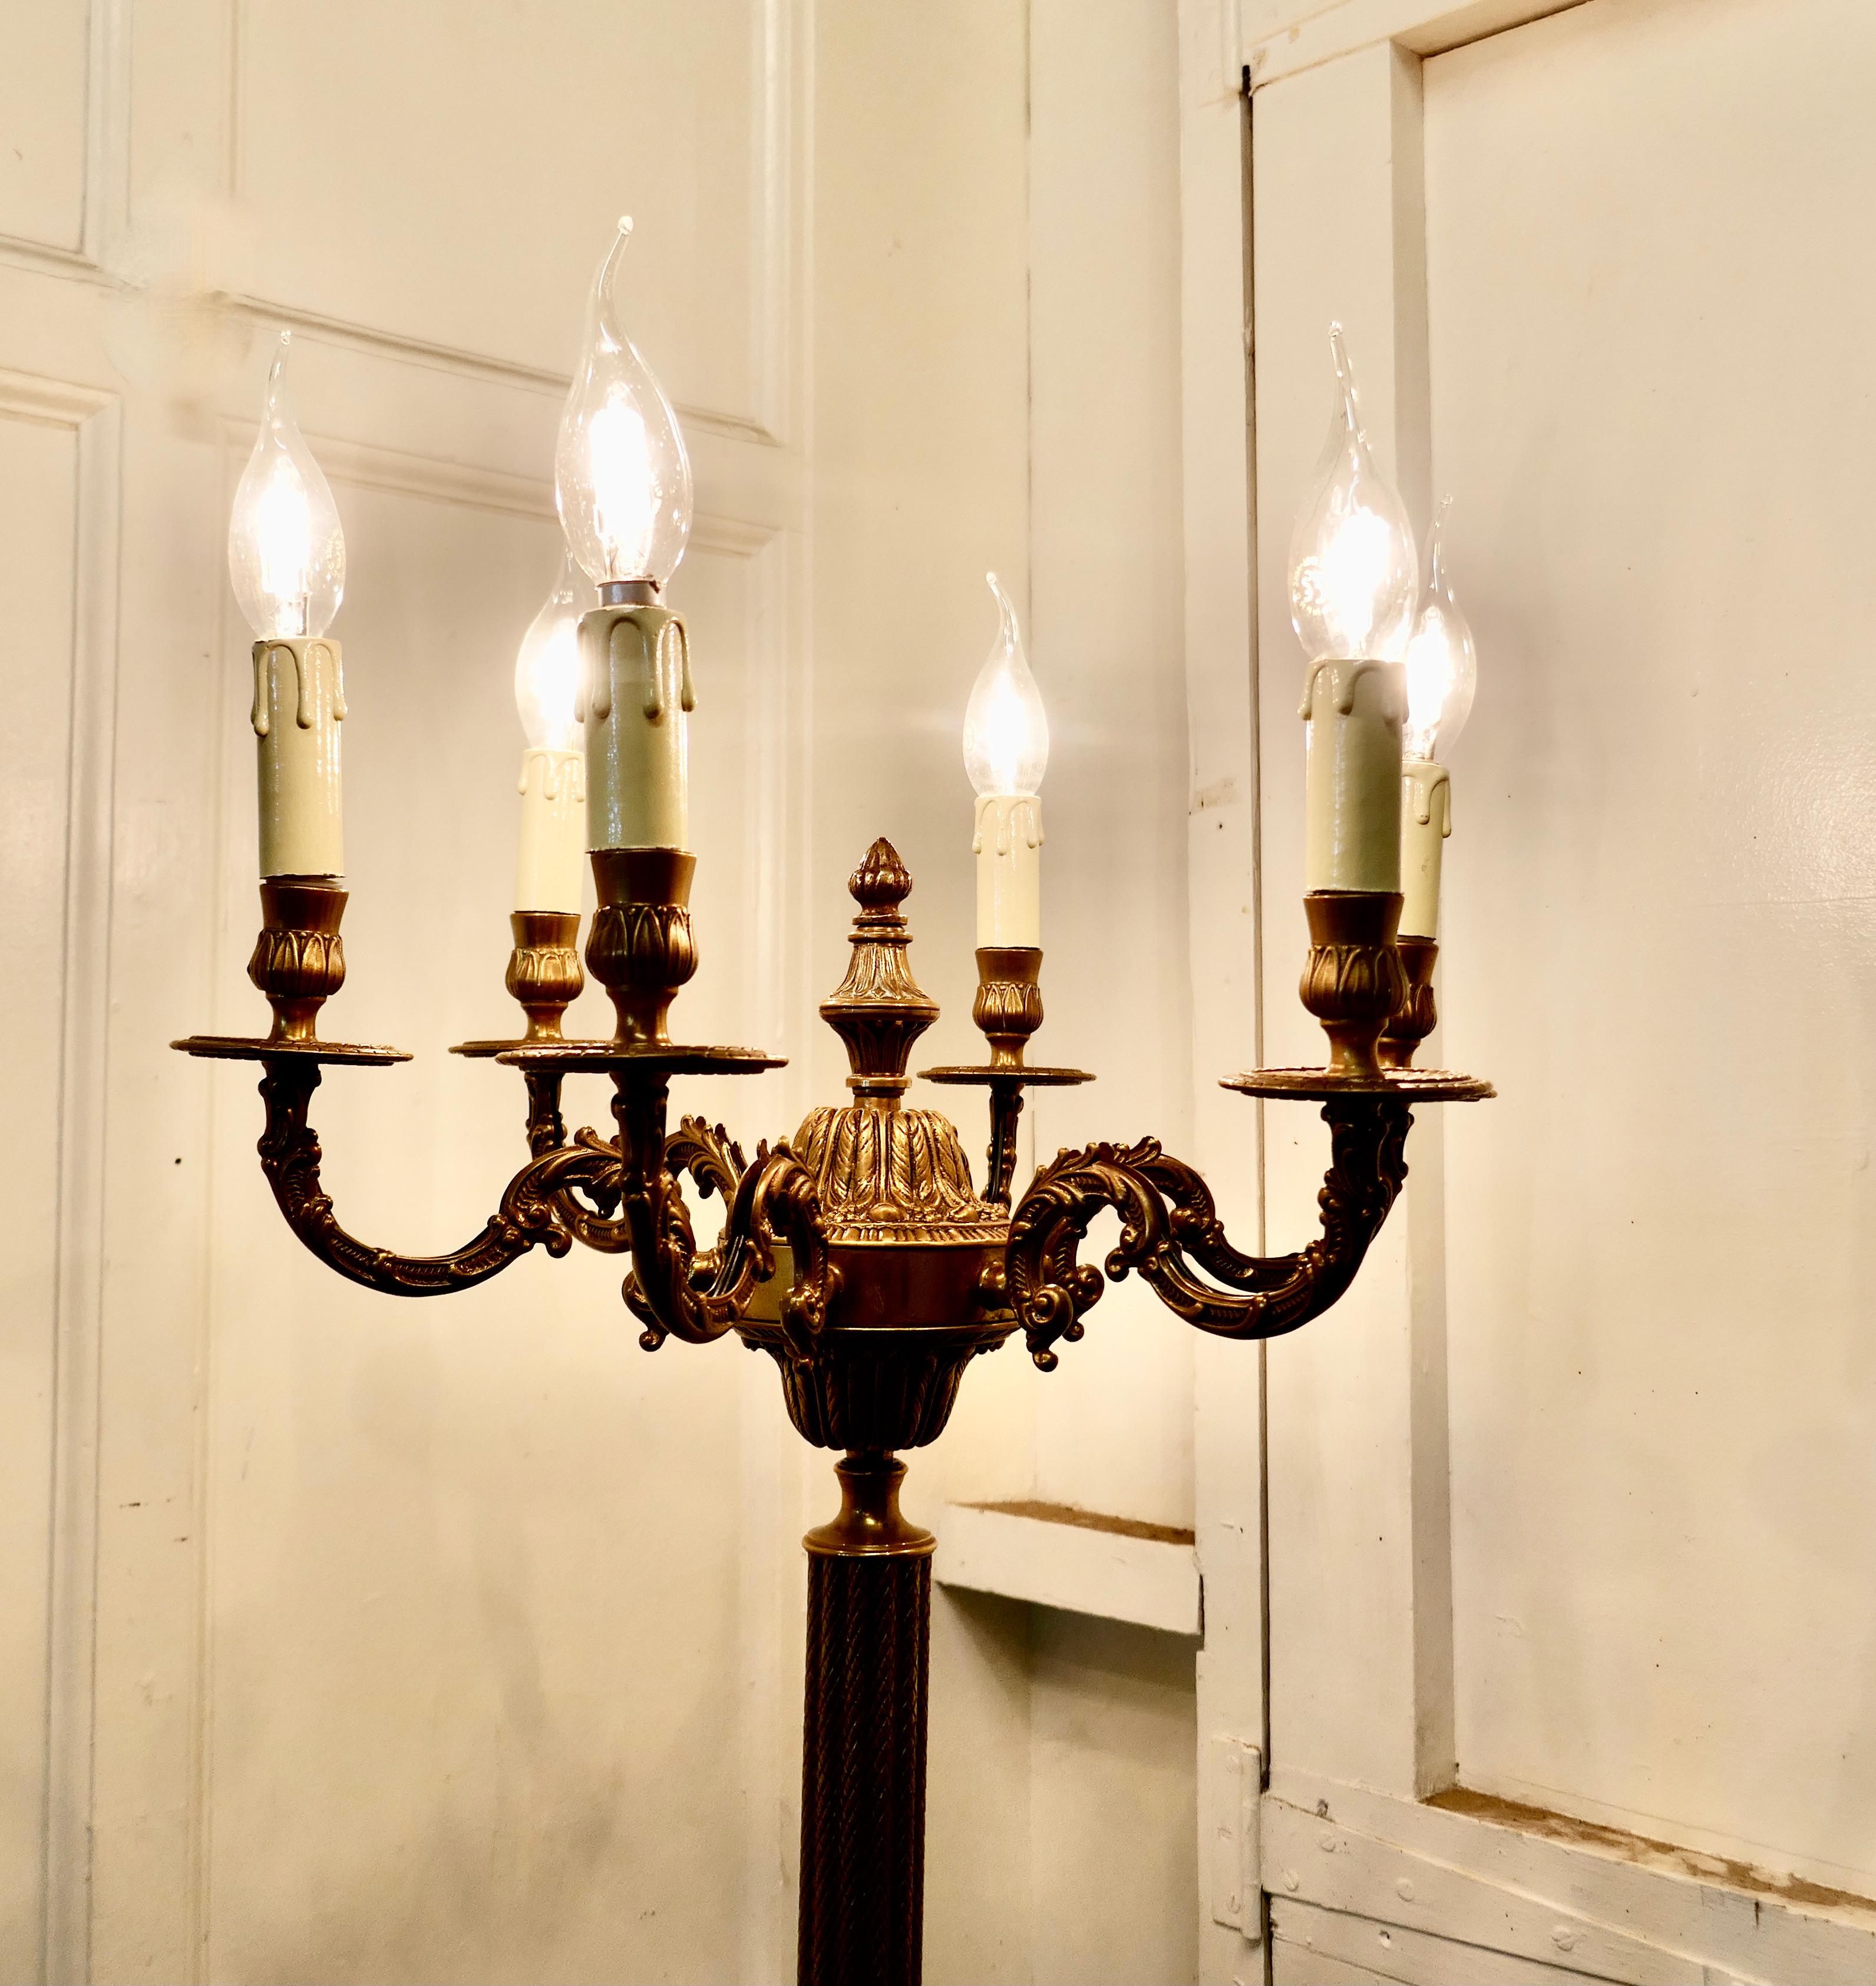 Rococo gilt brass candelabra 6 branch floor lamp, standard lamp

This is an elaborate and very attractive piece, the lamp has a fluted upright set on three dolphin feet, supporting a six branch candelabra 

The lamp has relatively new wiring and